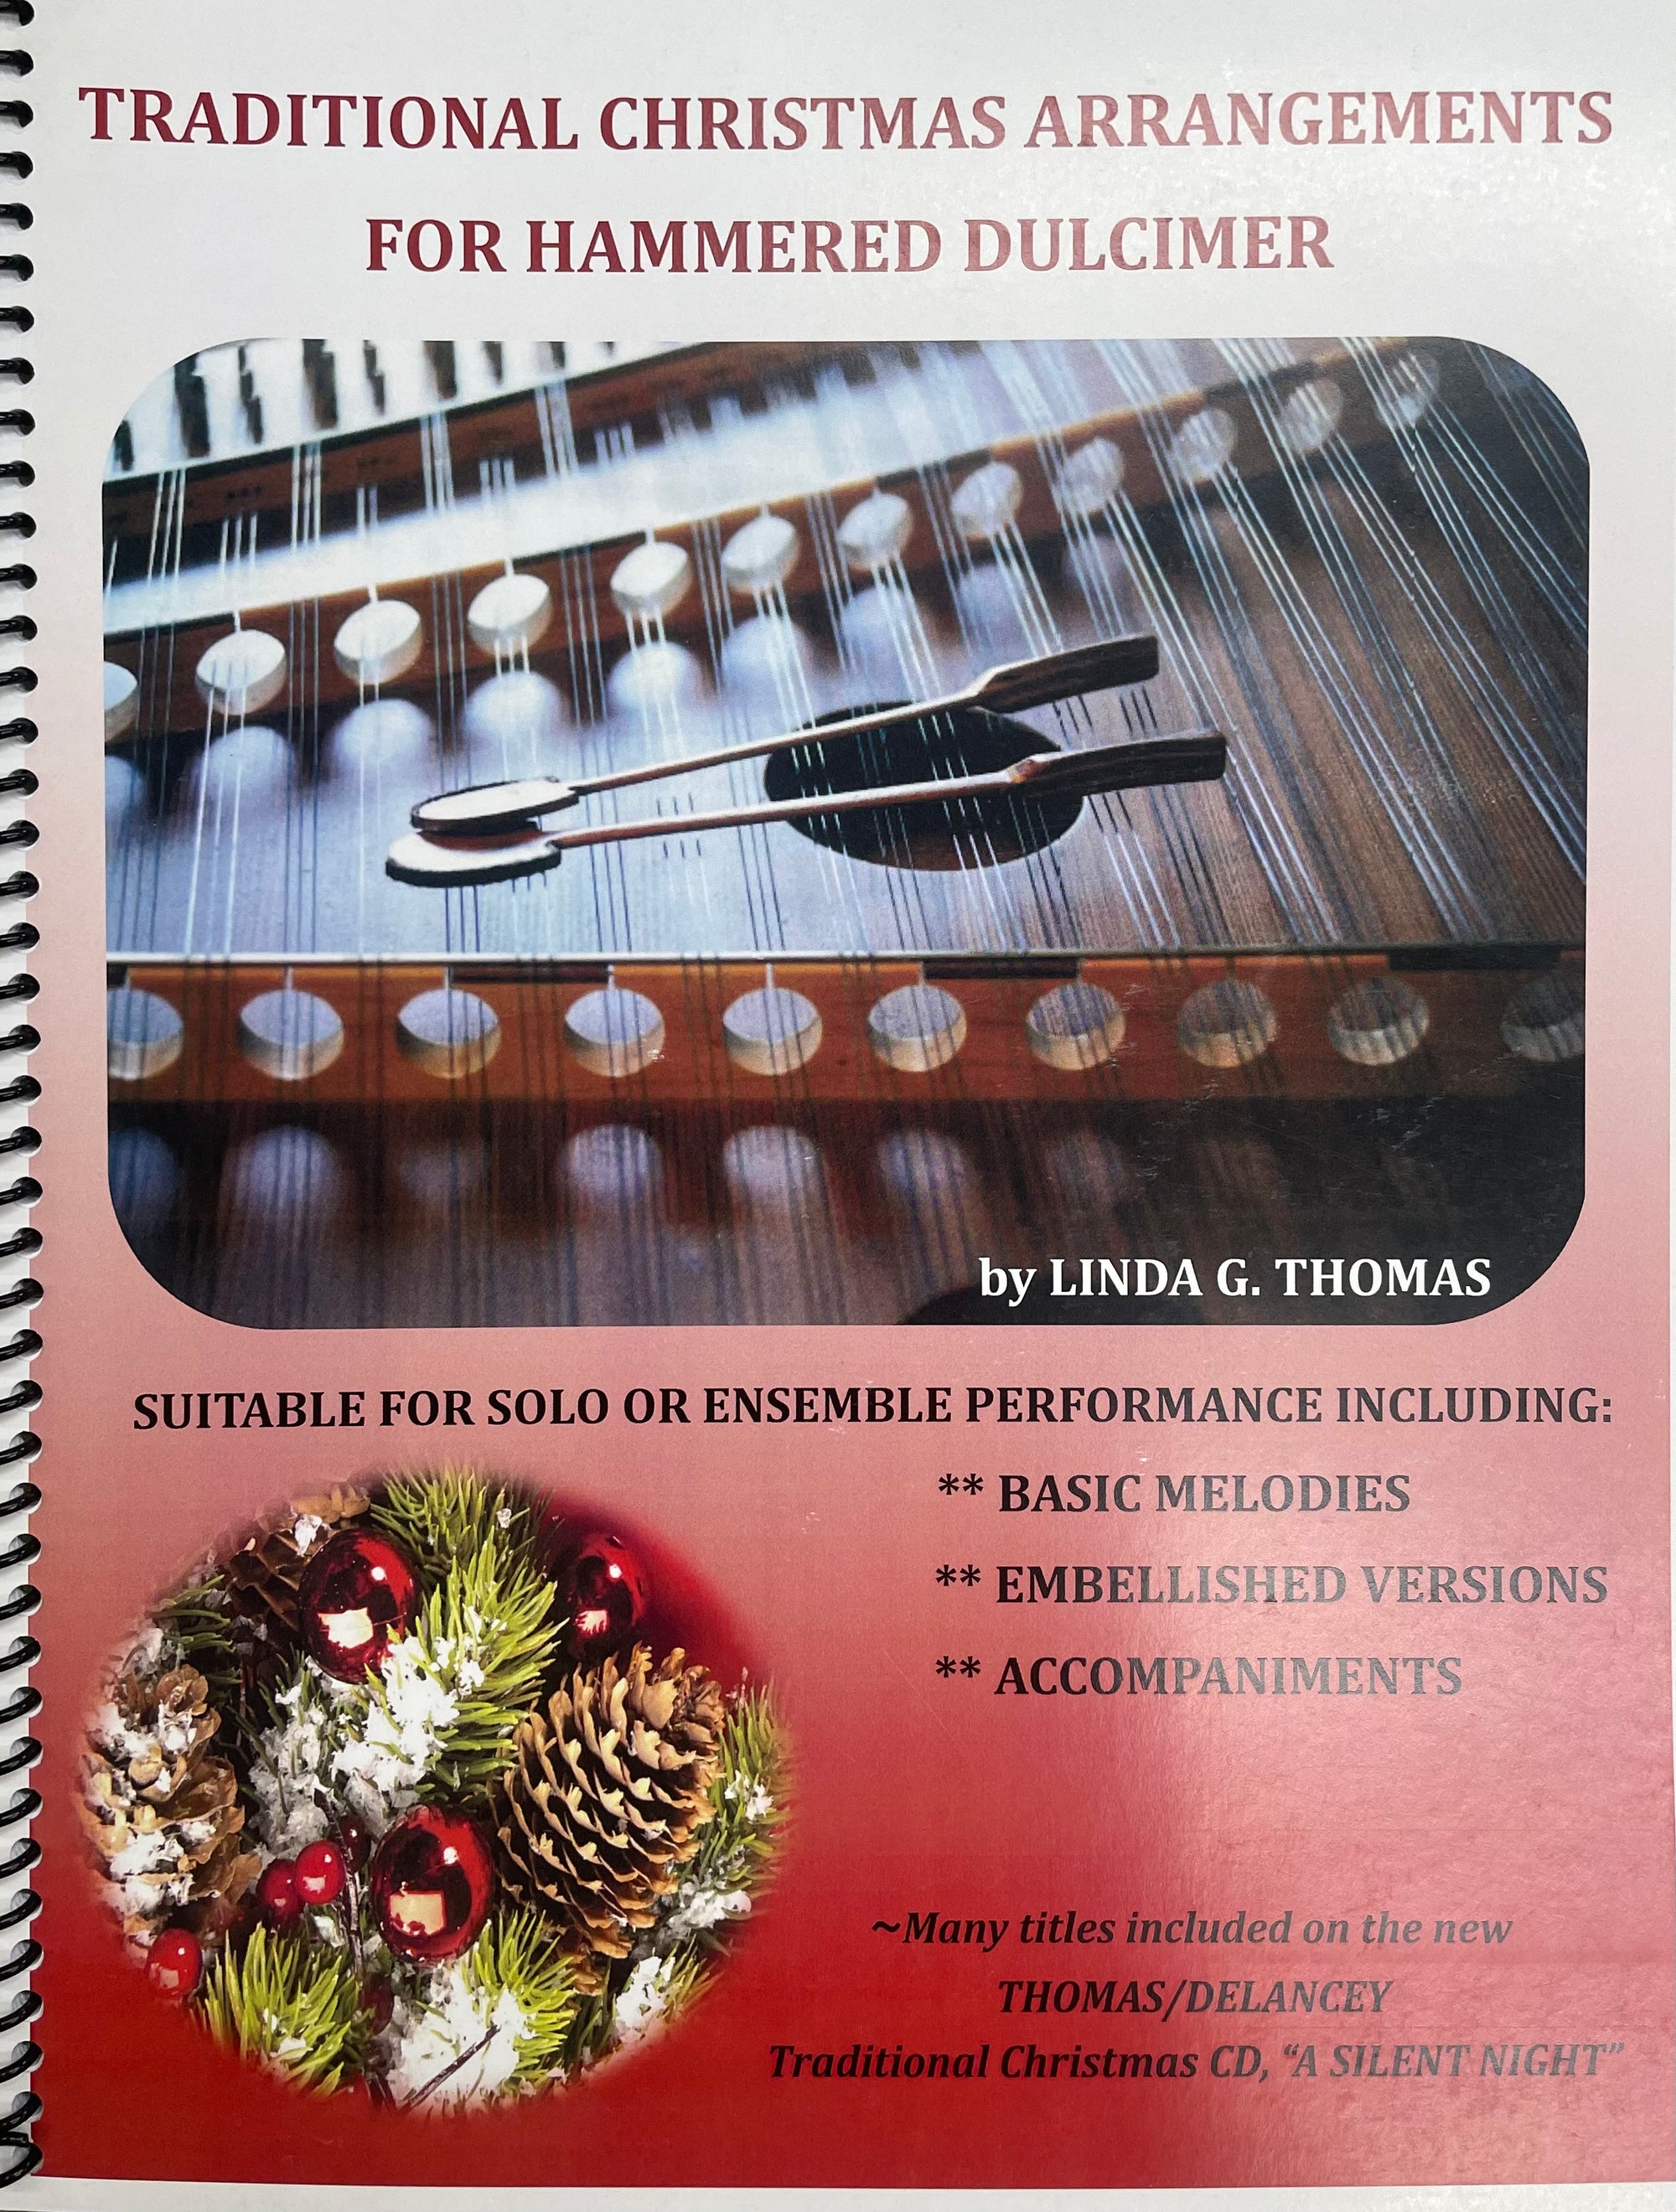 Cover of a book titled "Traditional Christmas Arrangements for Hammered Dulcimer by Linda Thomas," featuring a dulcimer and festive decorations. Includes Basic Melodies, Embellished Versions, Accompaniments, plus embellishment charts for advanced players seeking intricate Holiday arrangements.